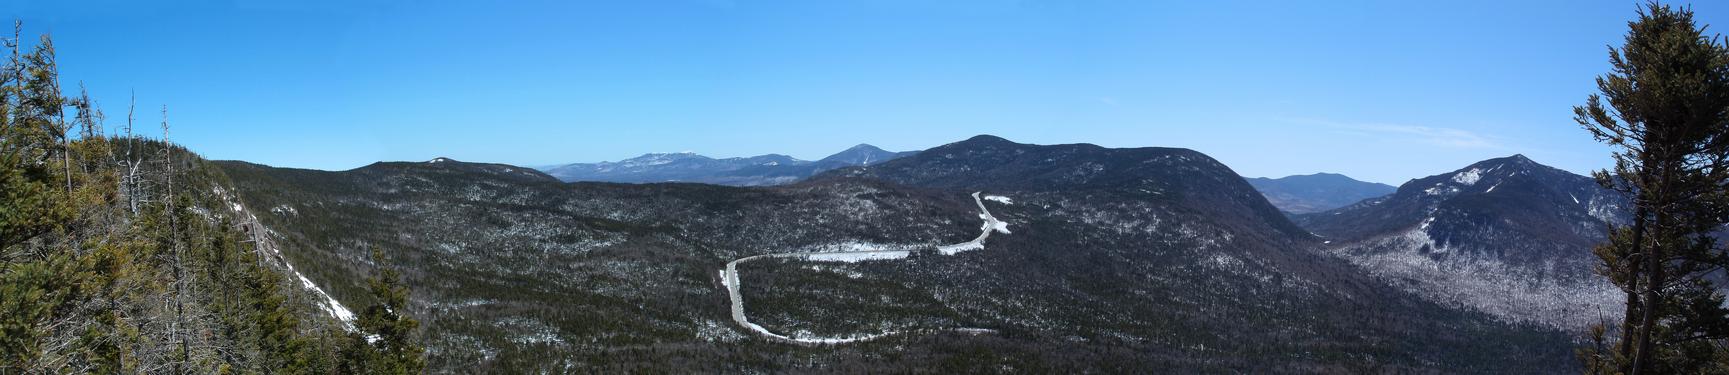 panoramic view from West Huntington Mountain in the White Mountains of New Hampshire